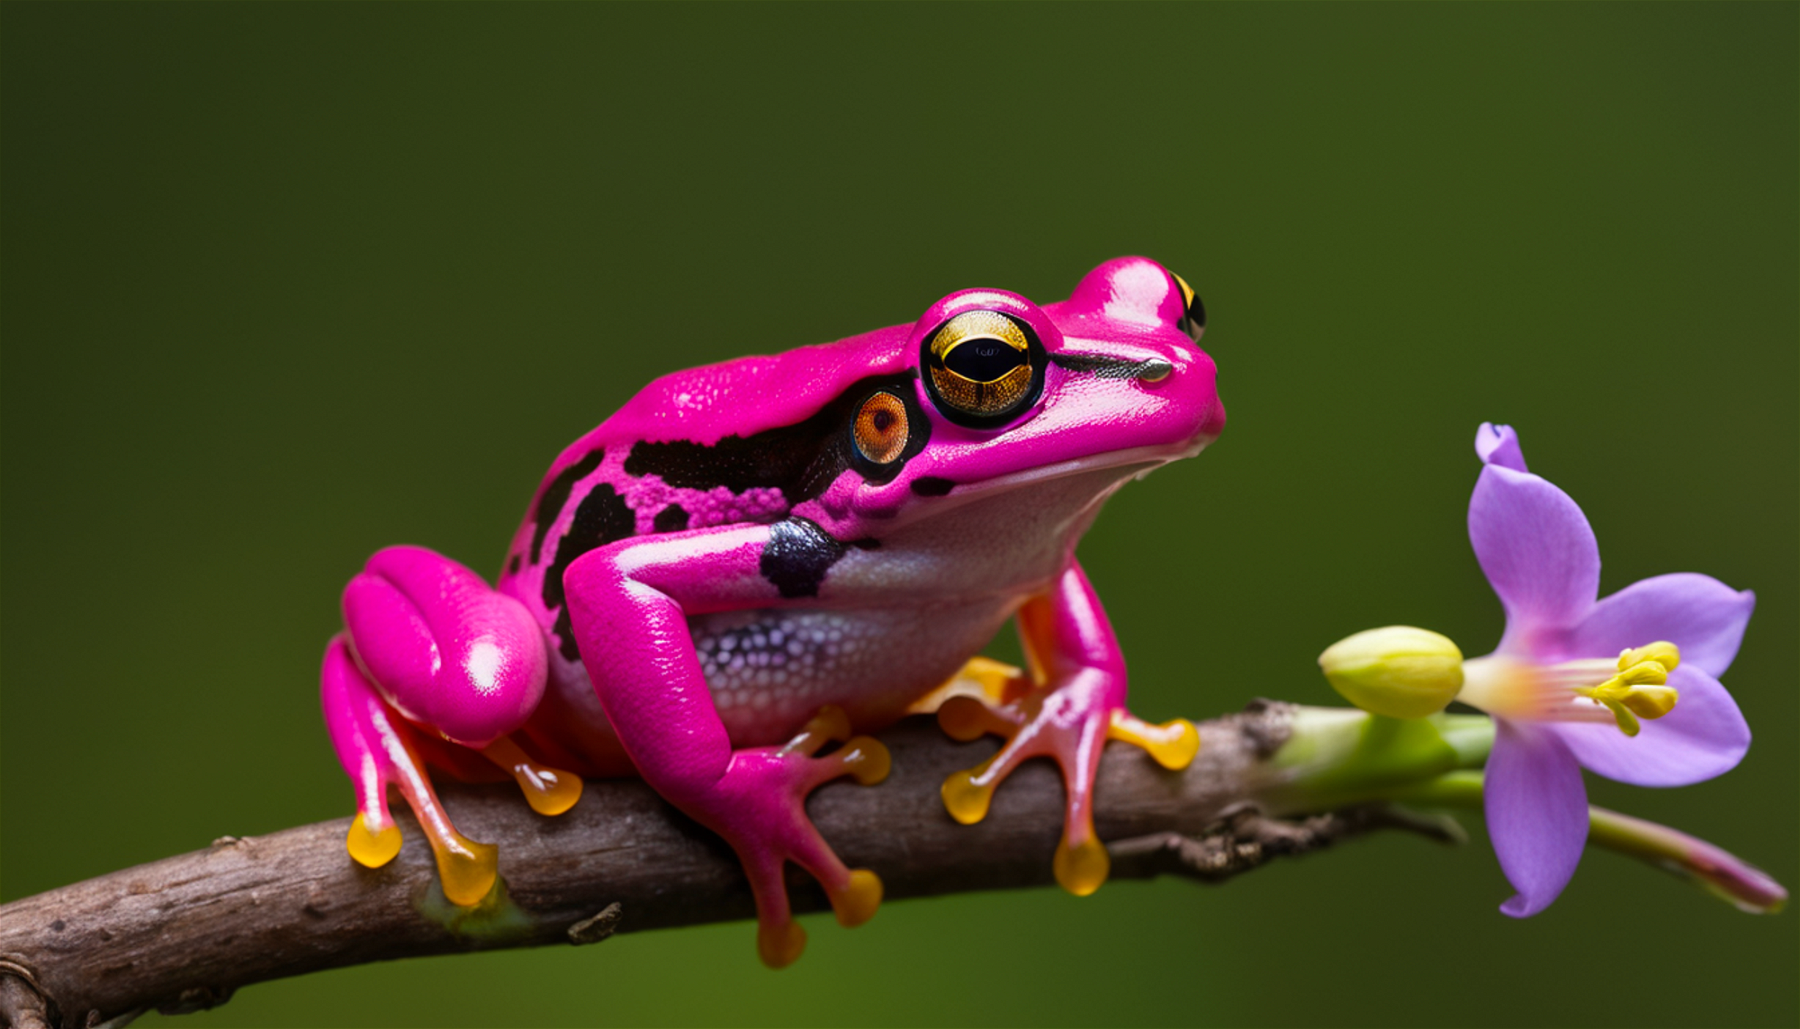 National Geographic photo of a weird and funny looking fuschia frog on a small branch with Freesia flower